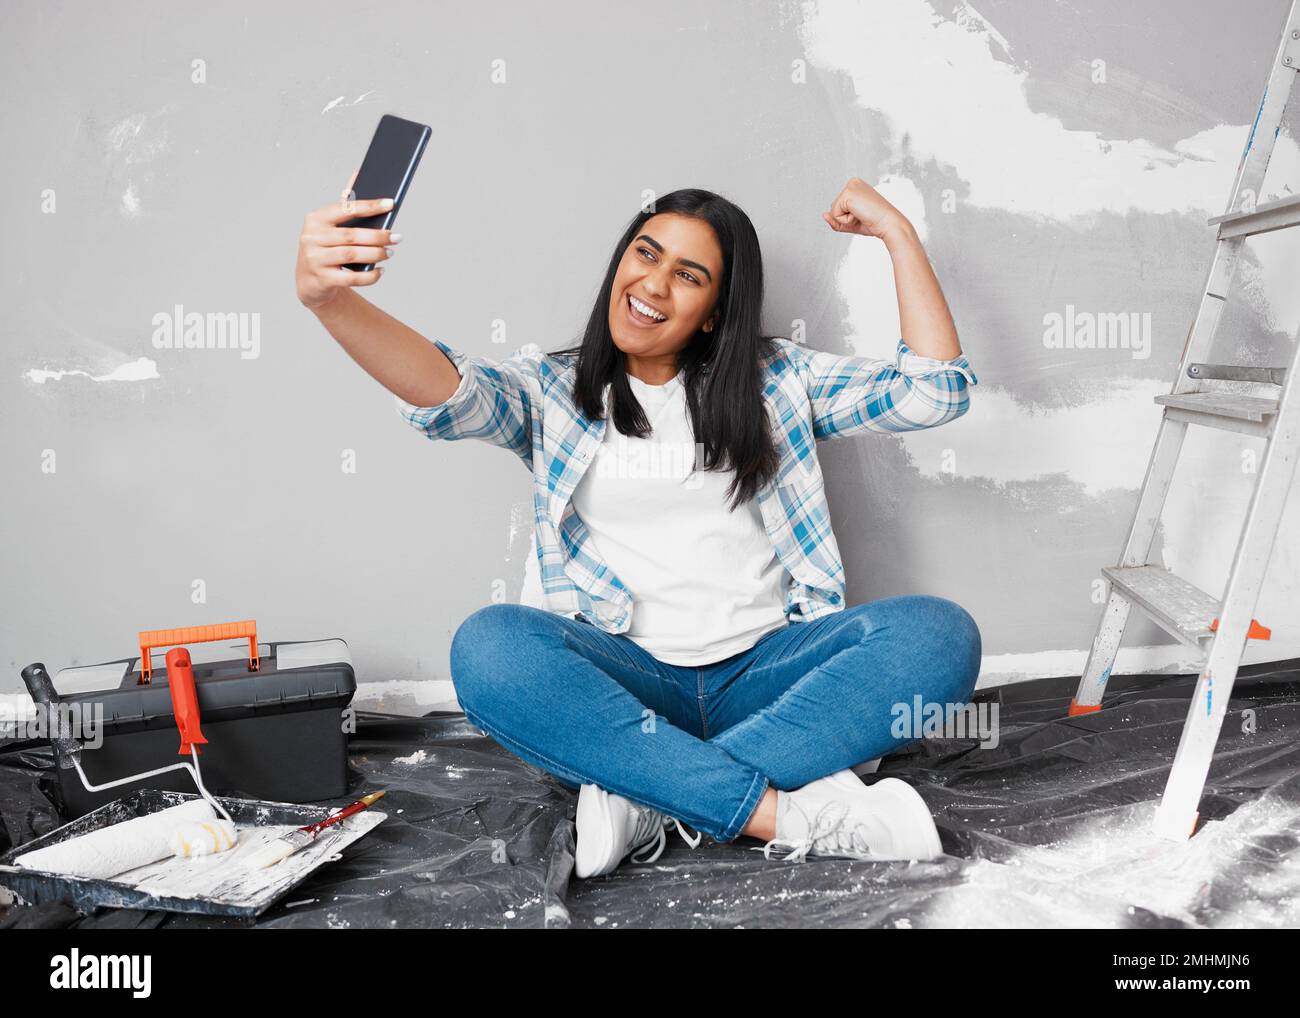 A young Indian woman takes a selfie while busy with home improvement DIY project Stock Photo